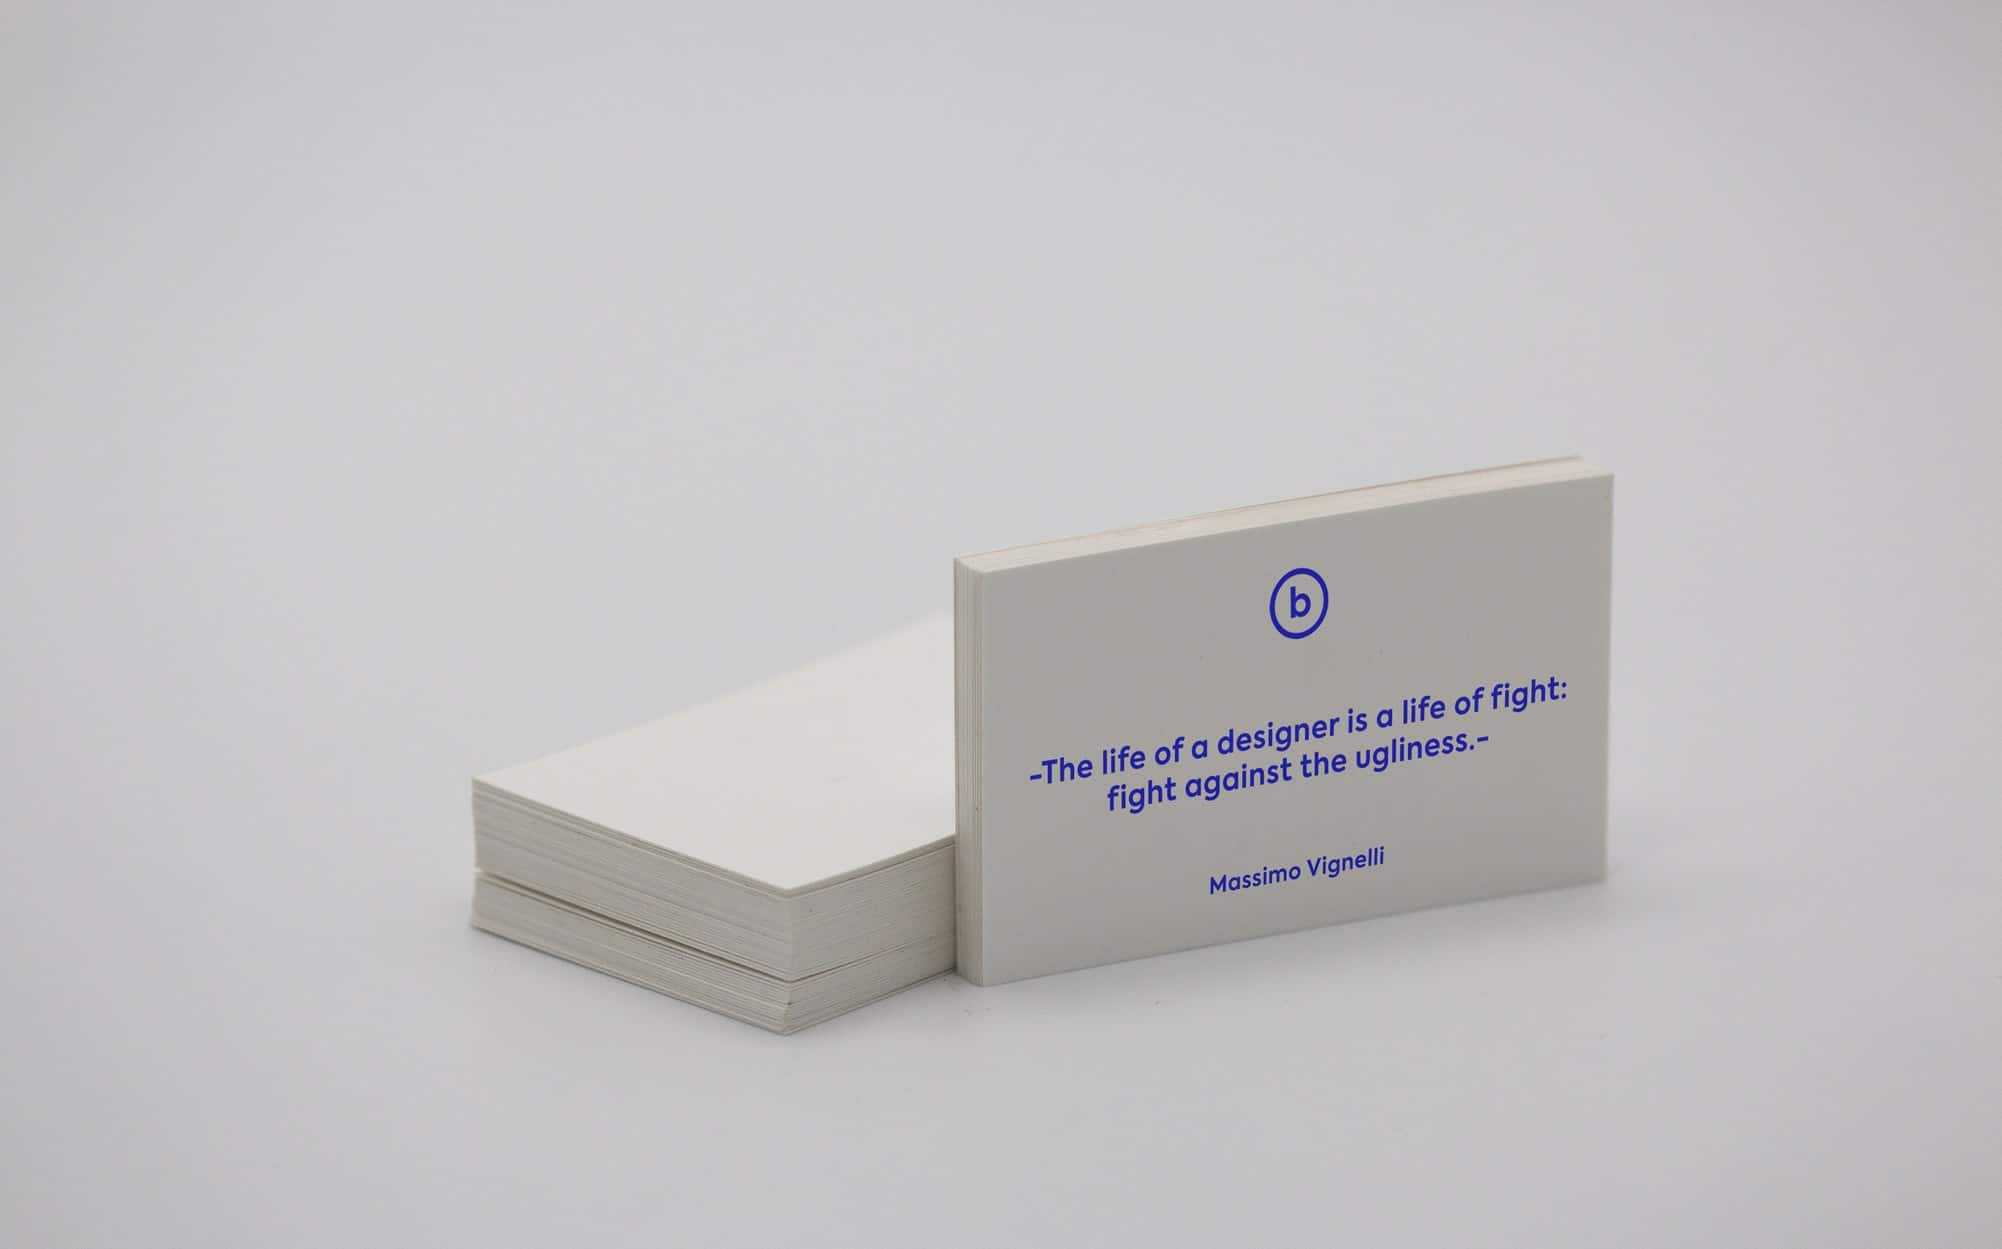 A proffessional business card.